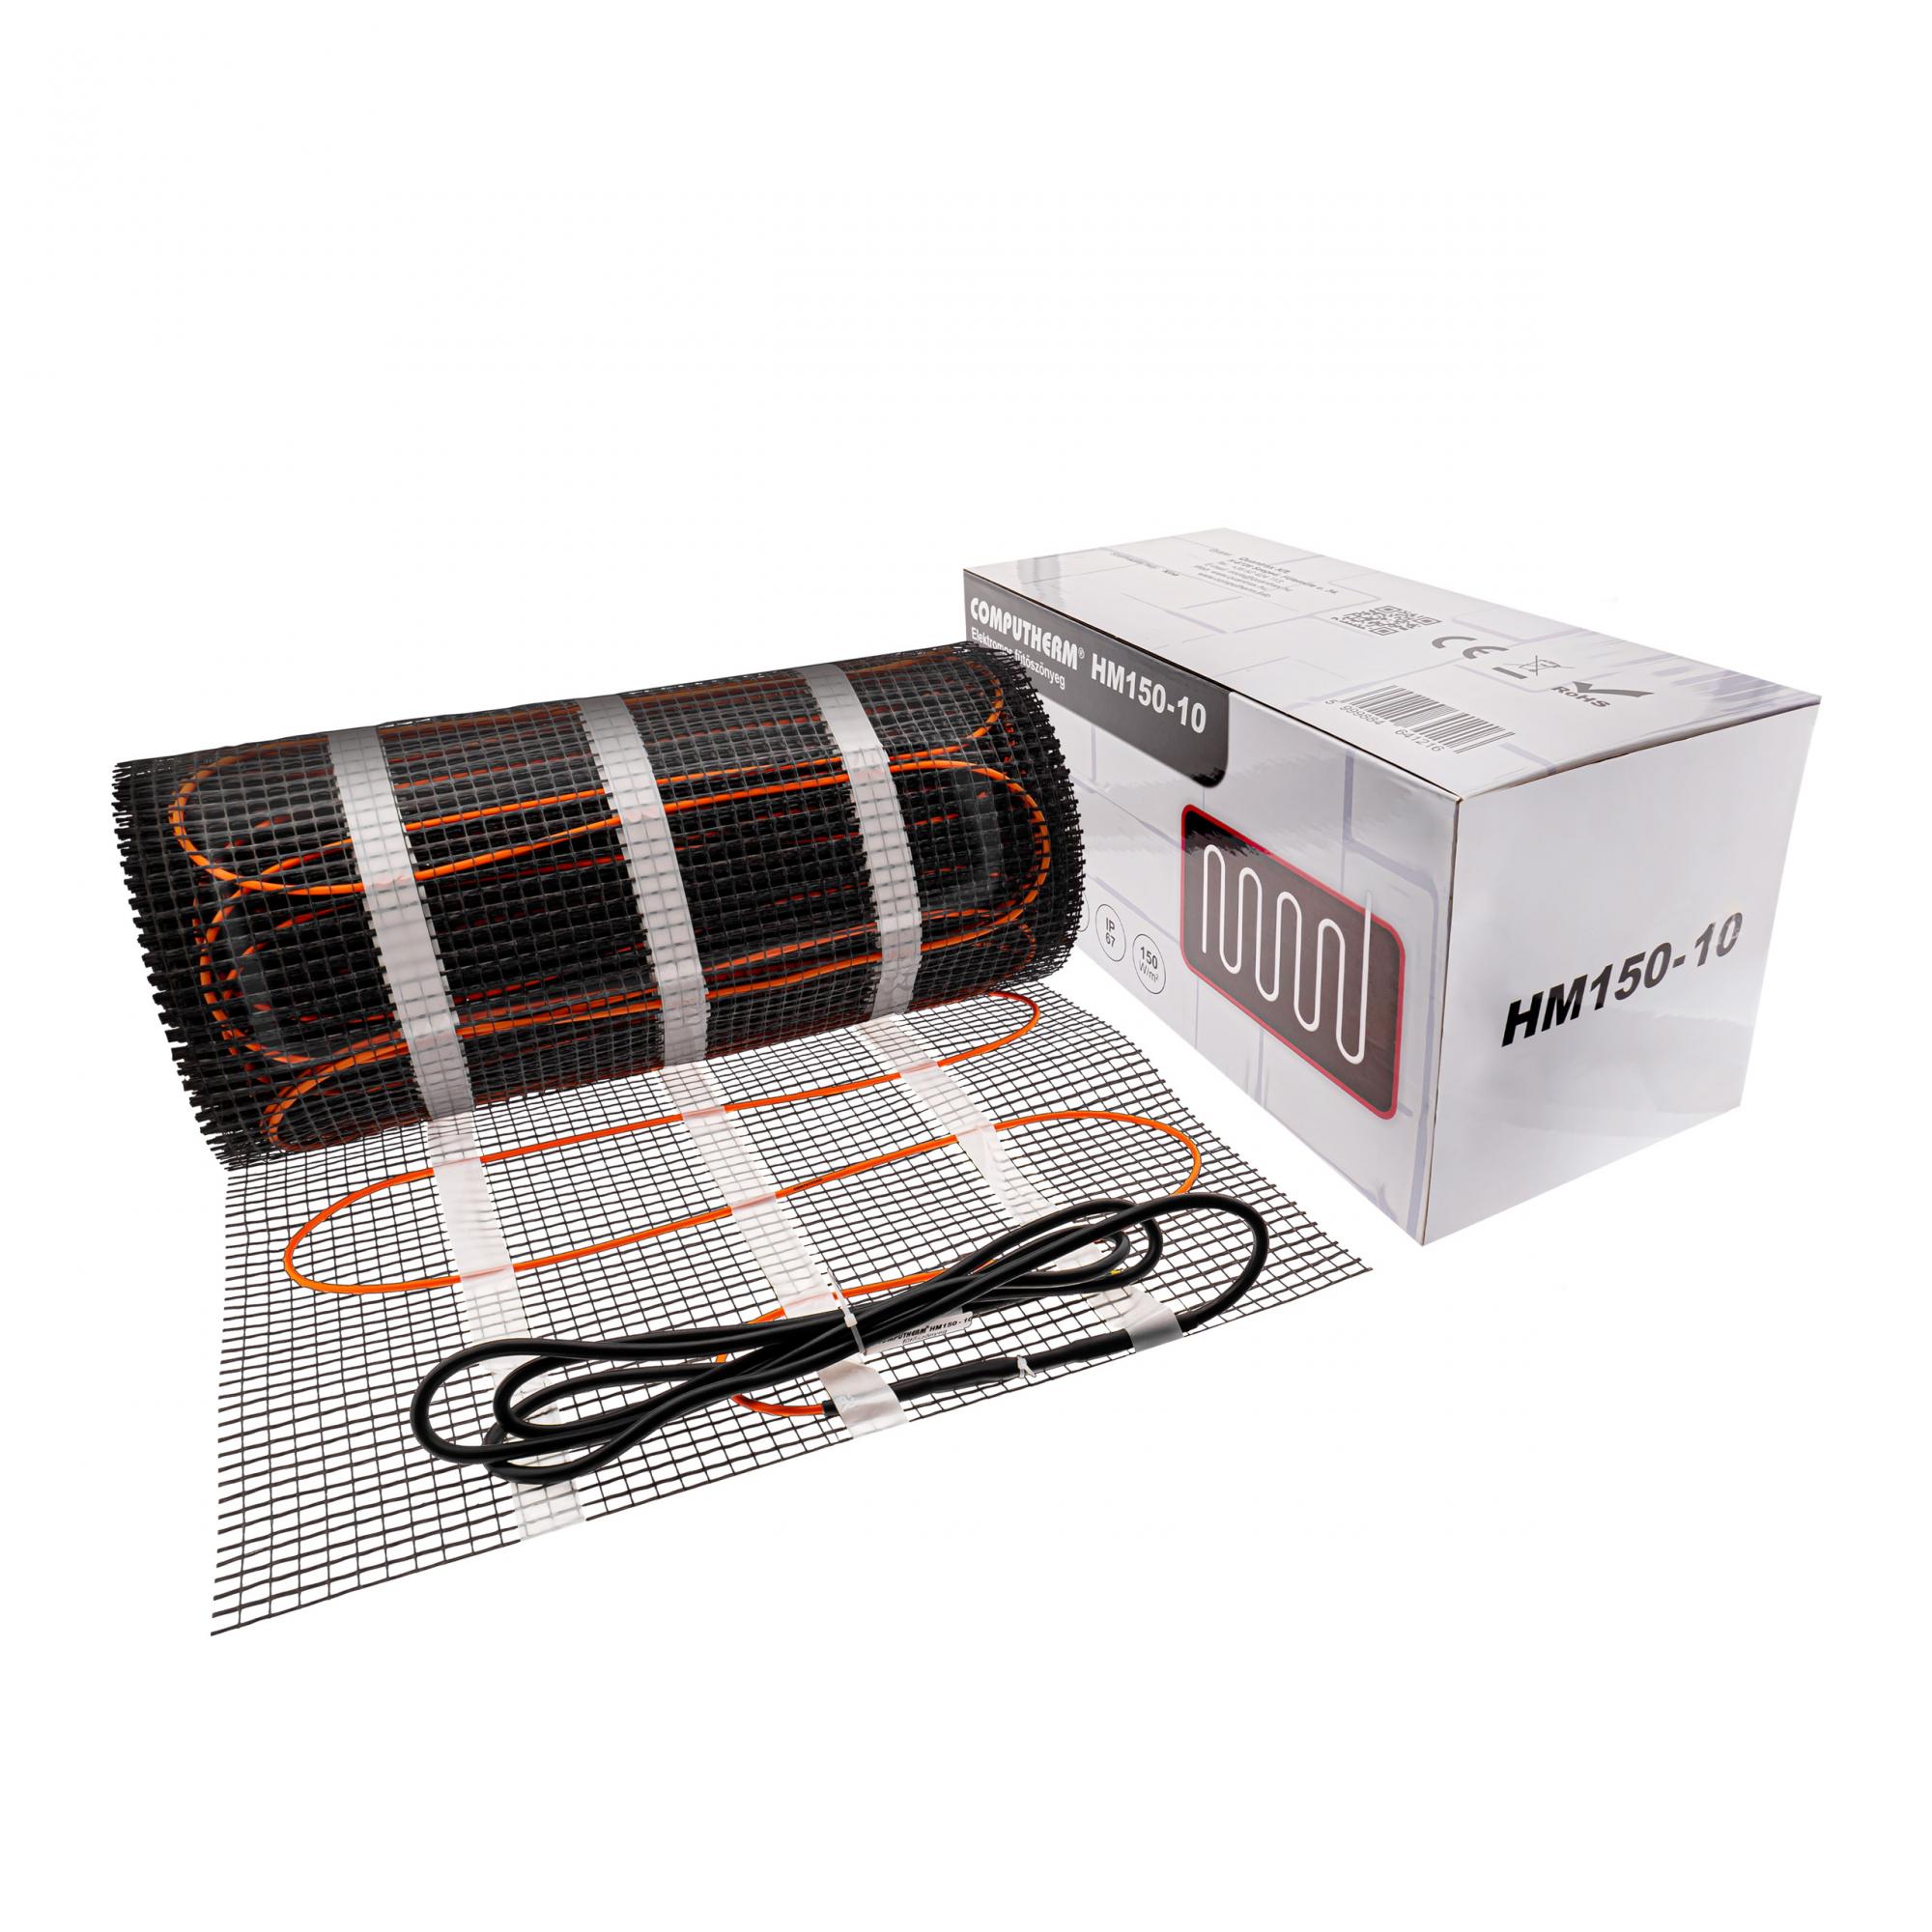 Computherm - Electric heating mat with box - COMPUTHERM HM150 - Quantrax Kft. 